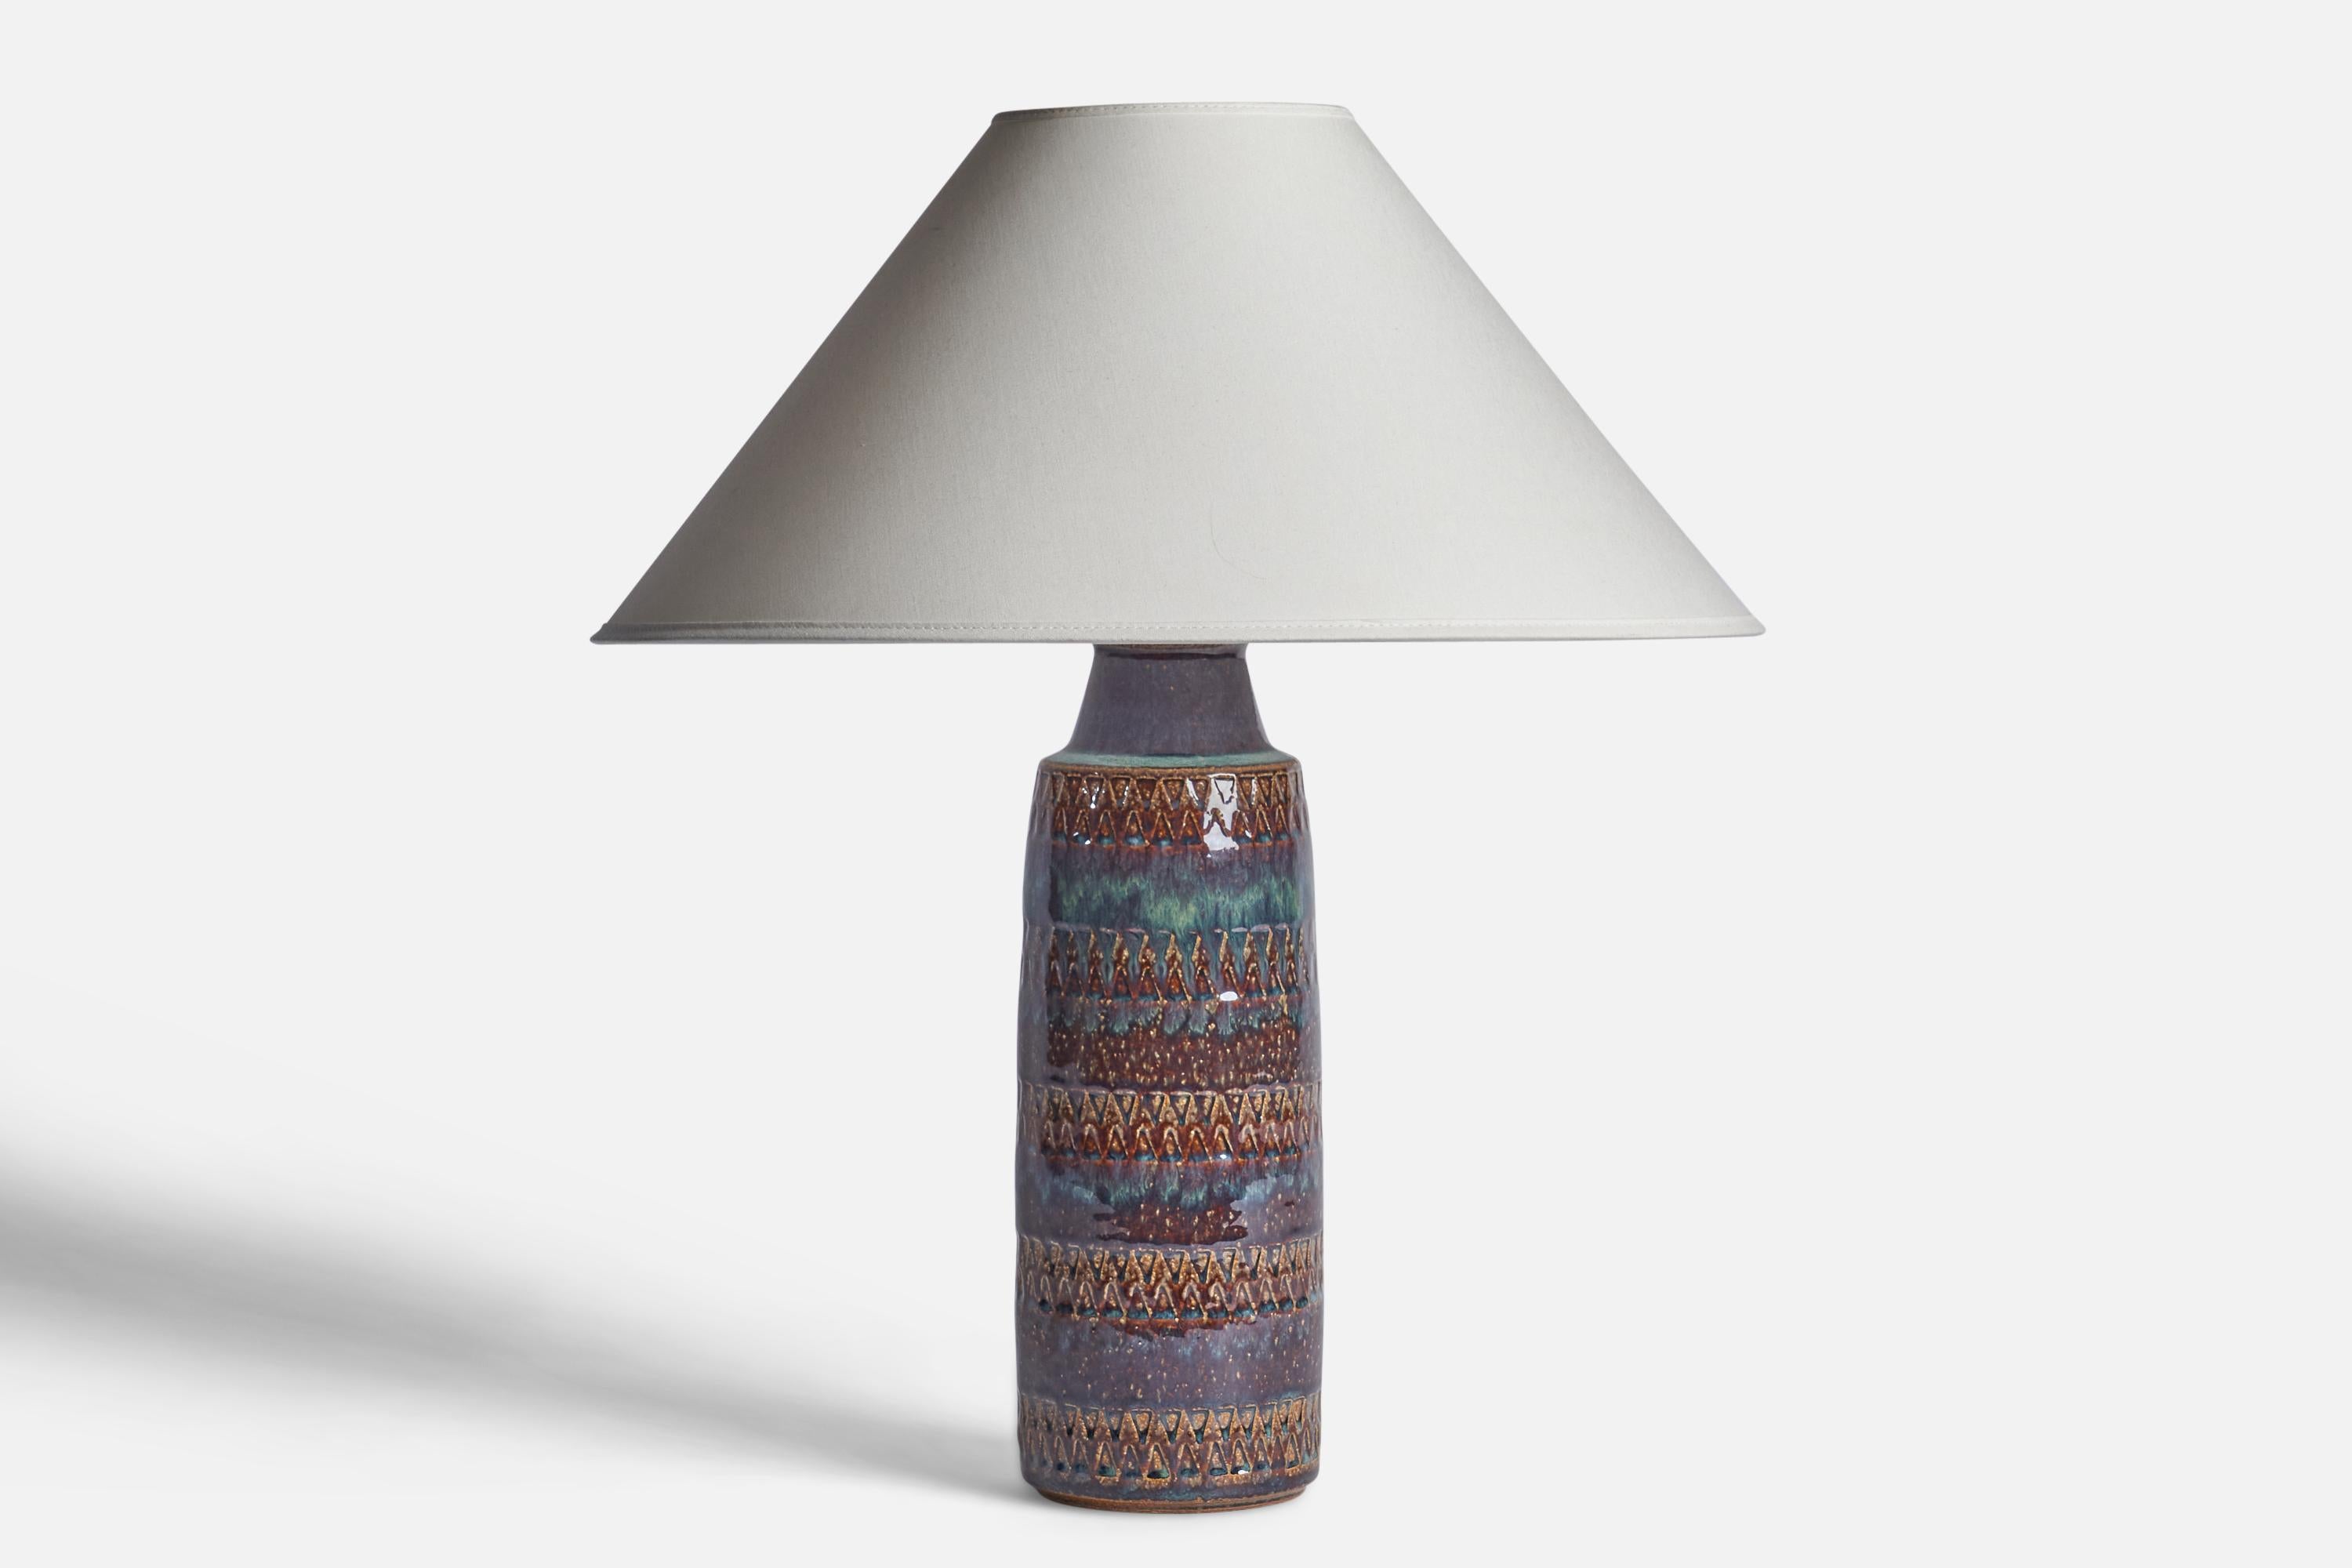 A blue and brown-glazed stoneware table lamp designed and produced by Søholm, Bornholm, Denmark, c. 1960s.

Dimensions of Lamp (inches): 15” H x 4” Diameter
Dimensions of Shade (inches): 4.5” Top Diameter x 16” Bottom Diameter x 7.25” H
Dimensions